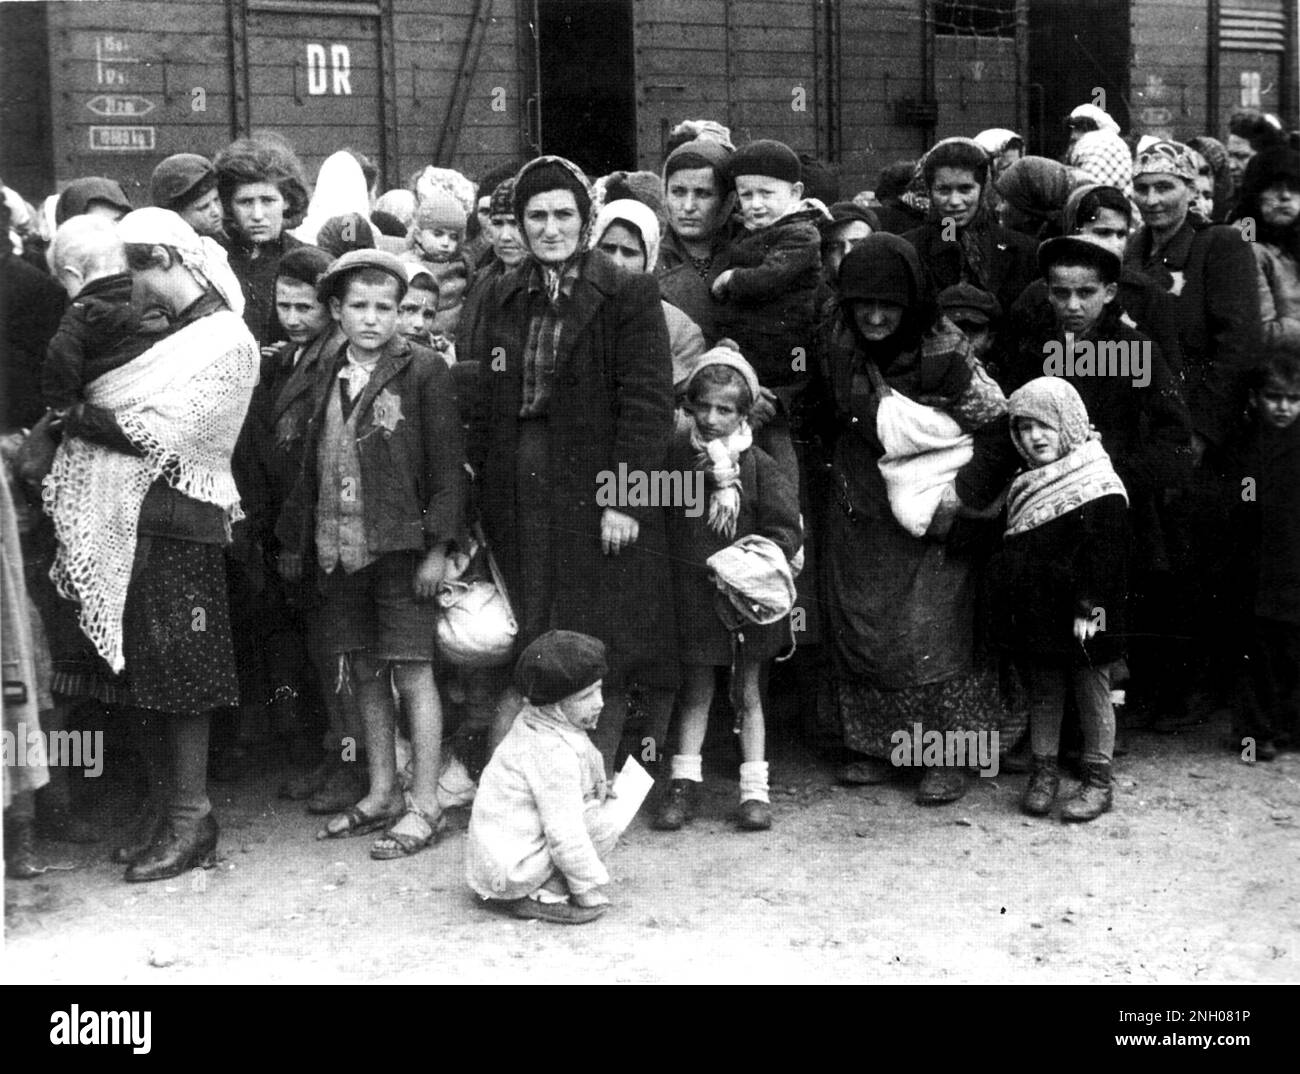 German Nazi death camp Auschwitz in Poland, arrival of Hungarian Jews, Summer 1944. Photo Bundesarchiv, Bild 183-N0827-318 / https://commons.wikimedia.org/w/index.php?curid=5367208 Stock Photo